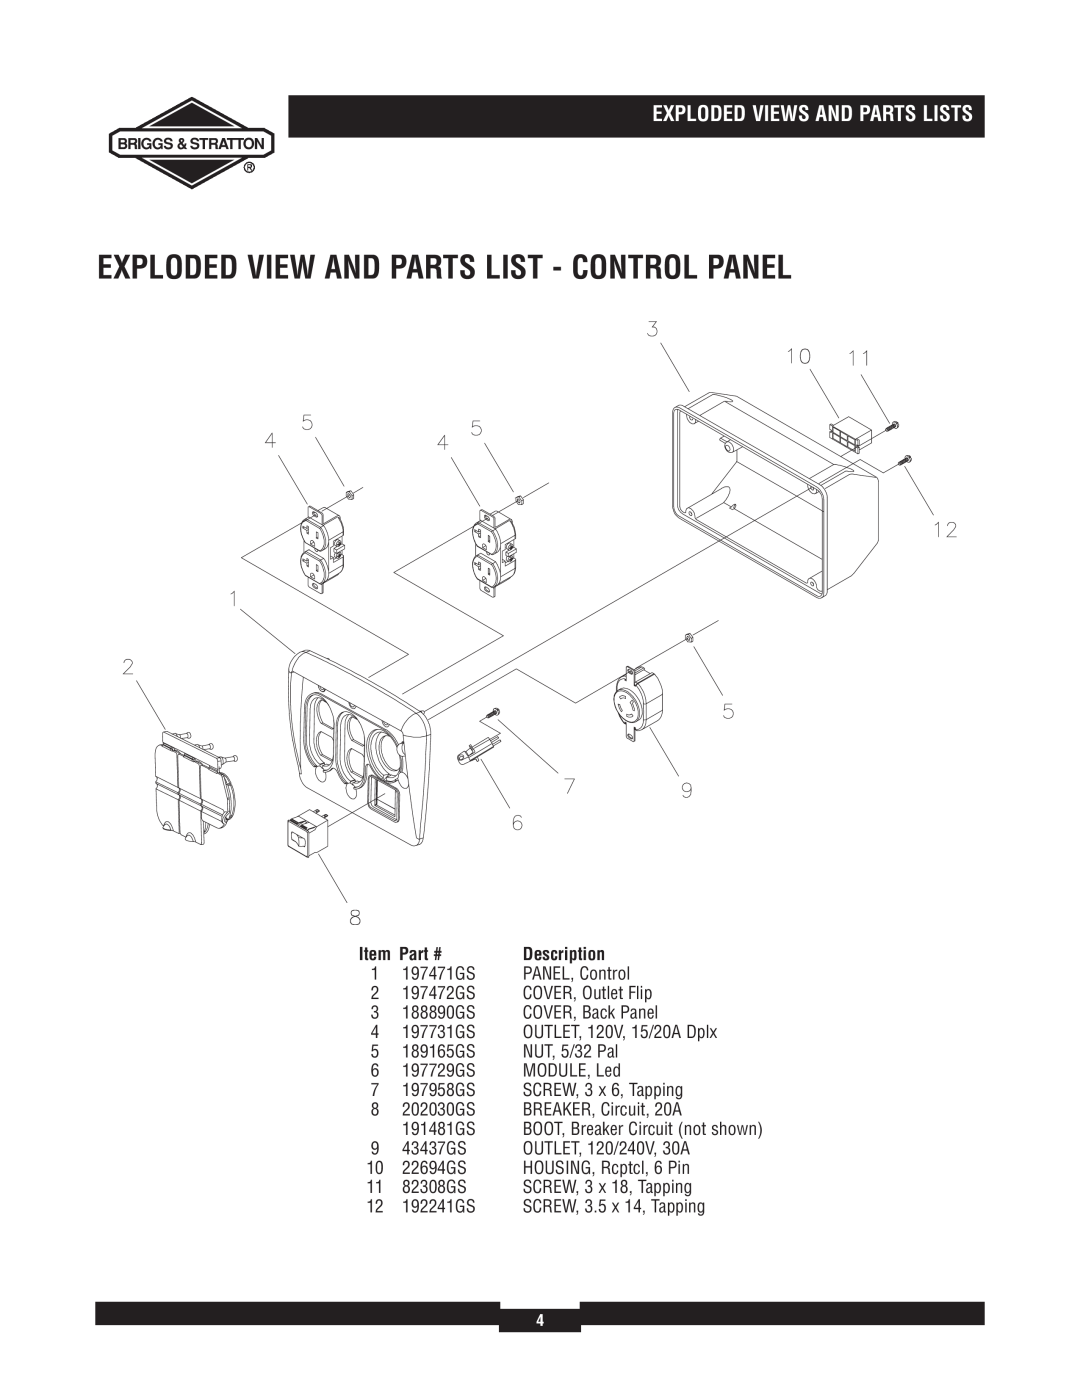 Briggs & Stratton 30324 manual Exploded View And Parts List - Control Panel, Exploded Views And Parts Lists 